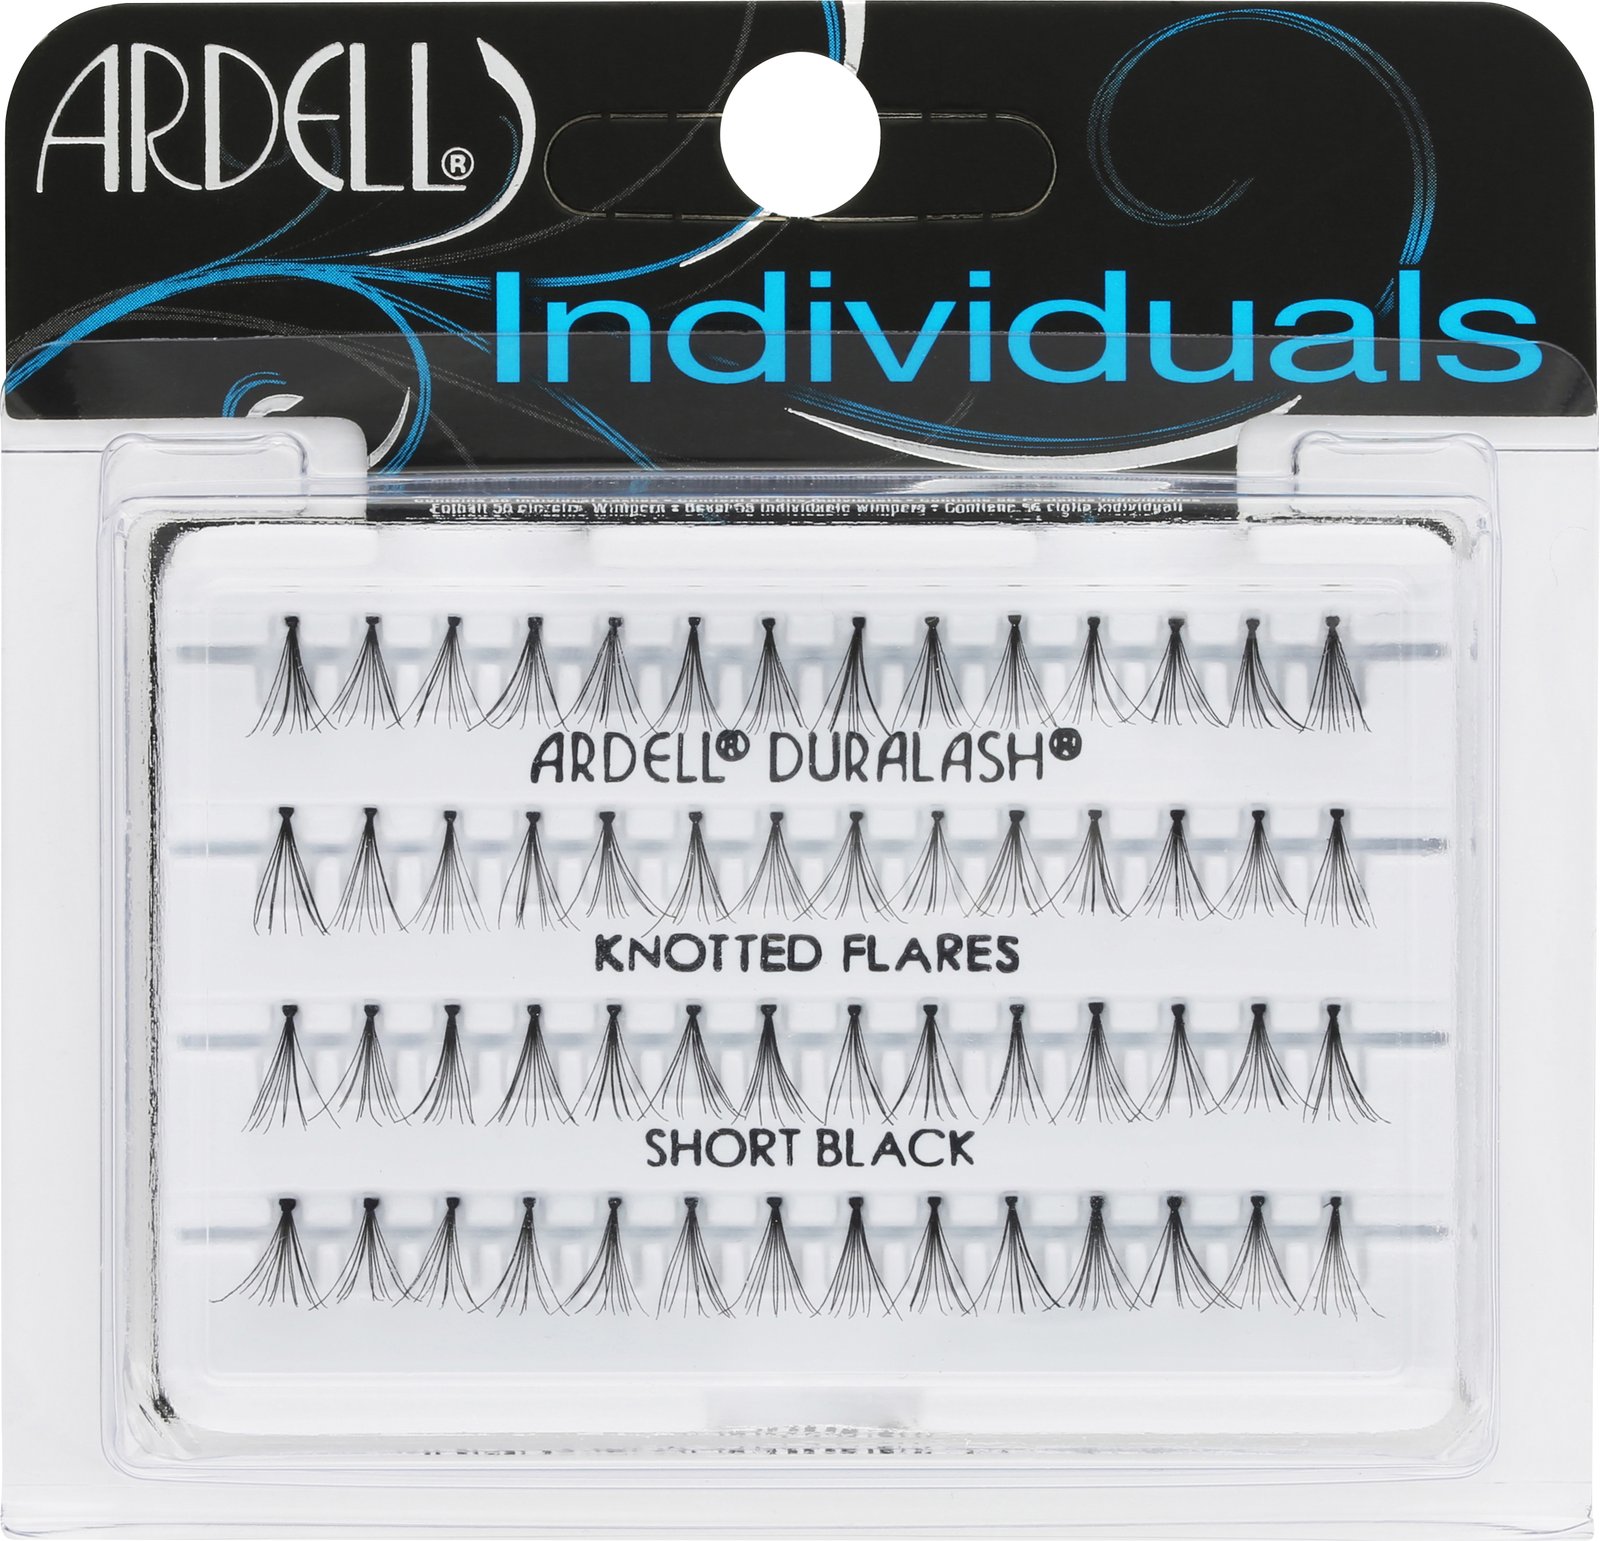 ARDELL Individuals DuraLash Knotted Flares Short 56 st